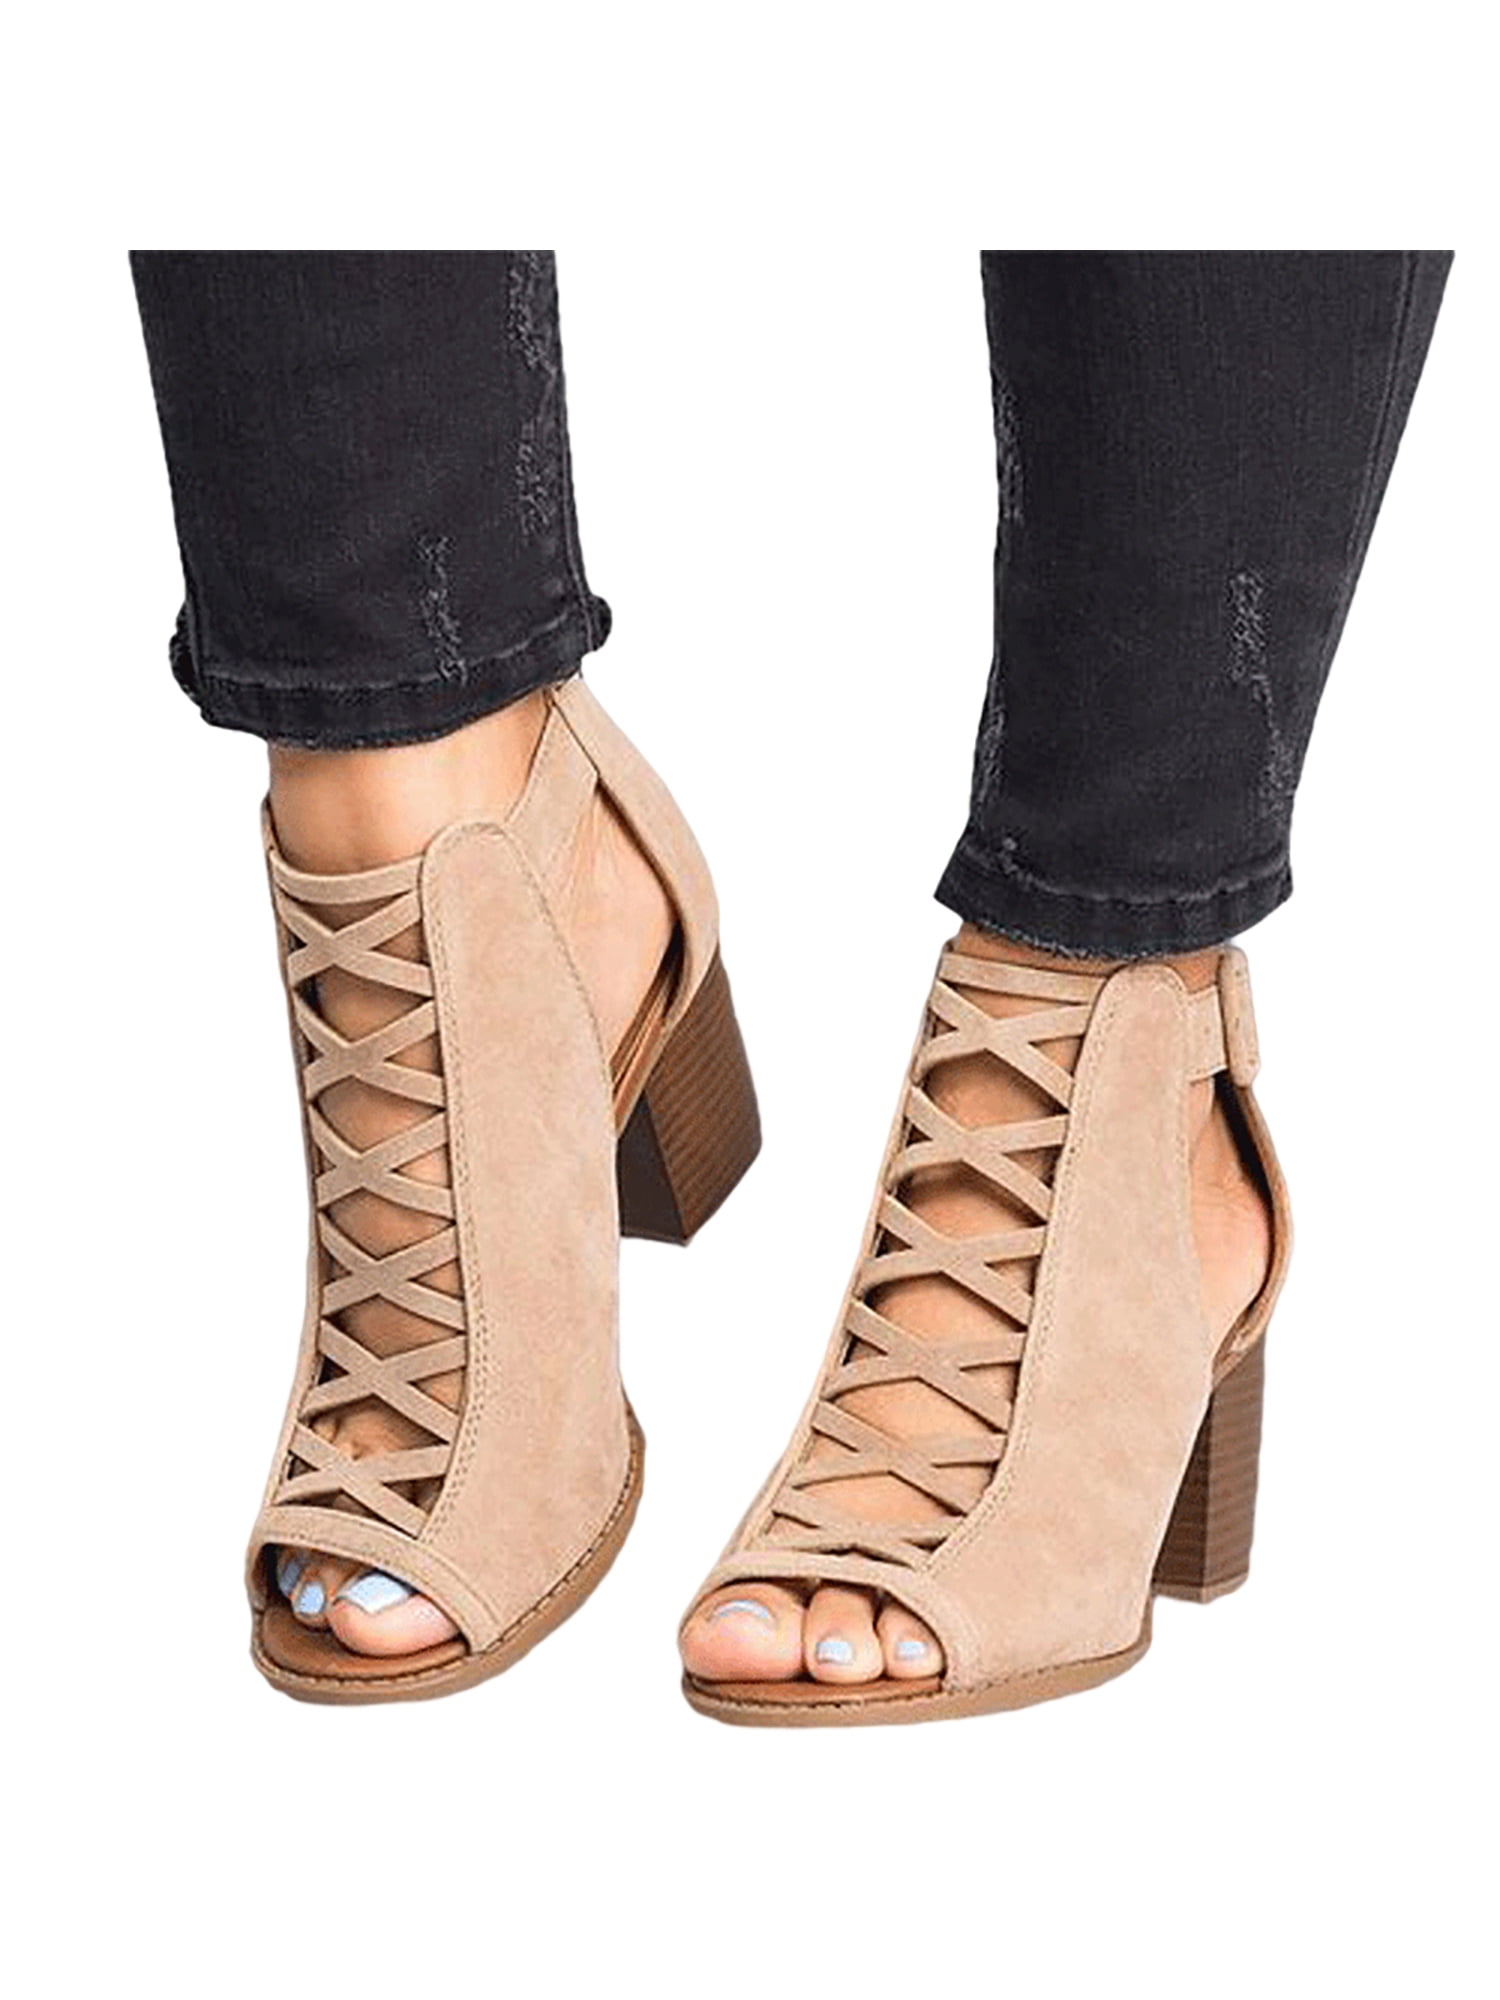 Womens sweet Round Toe Ankle Strap Block Heel casual Party Shoes 